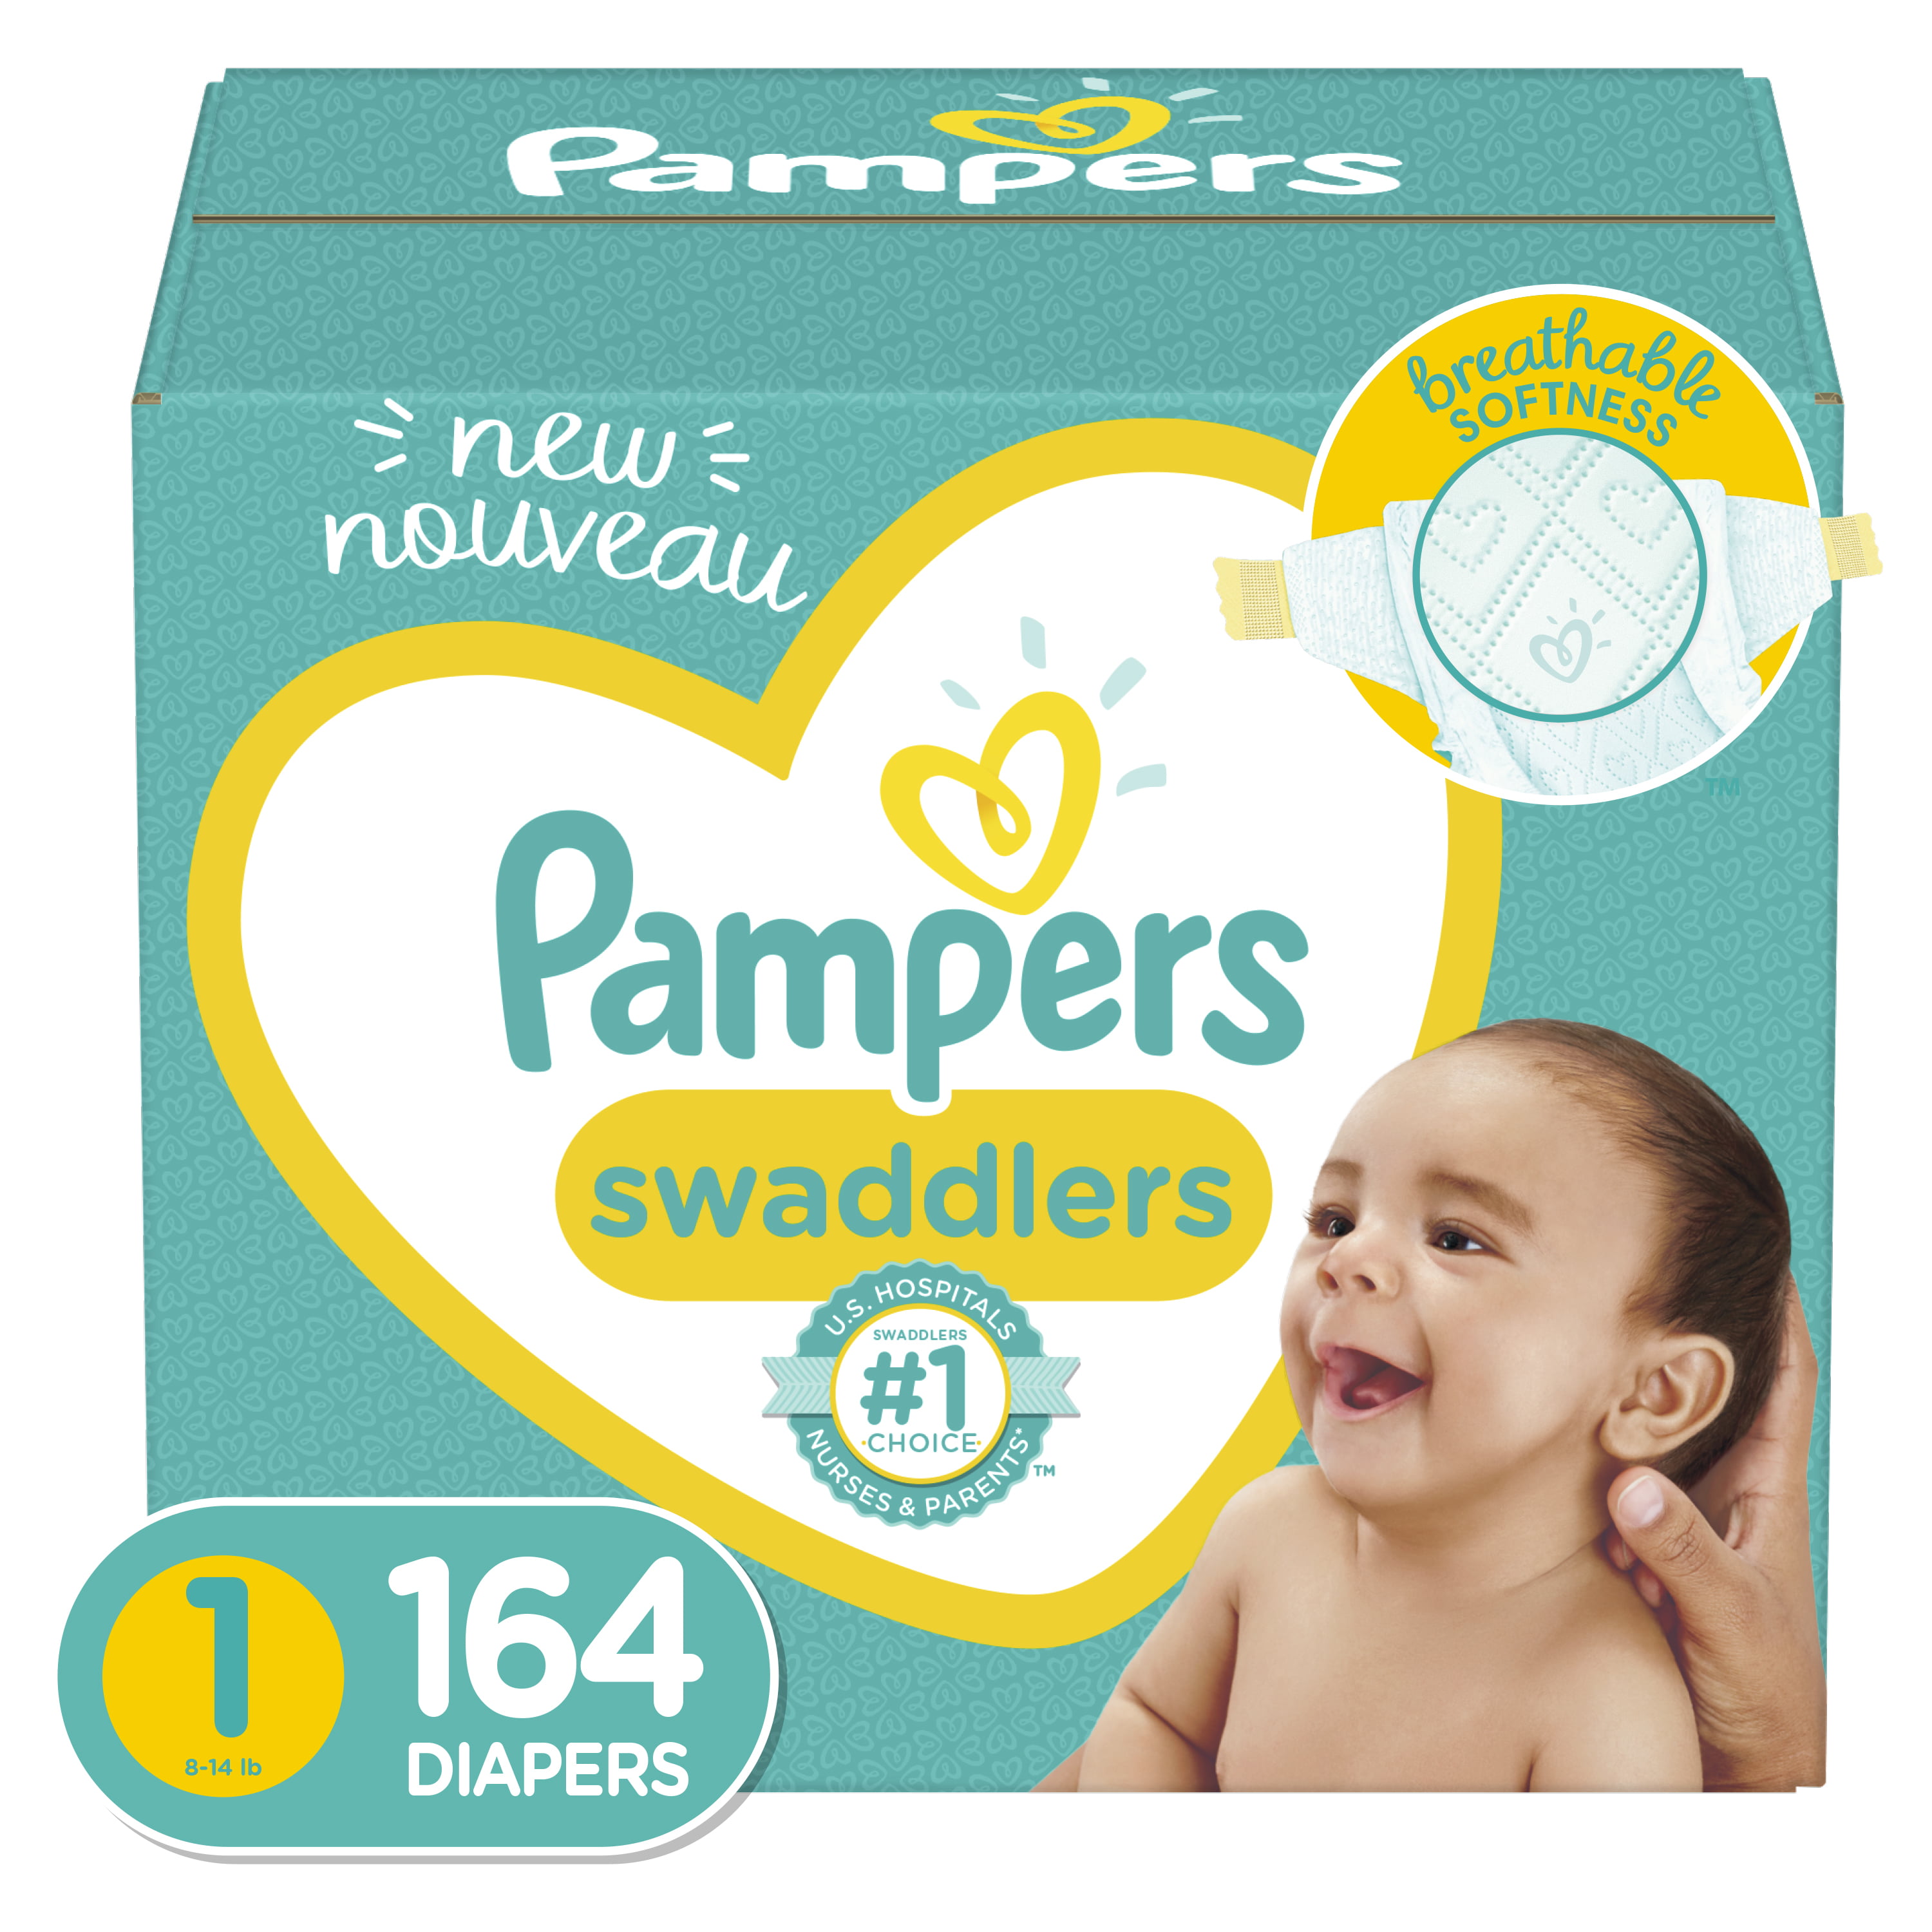 Pampers Swaddlers Soft and Absorbent 